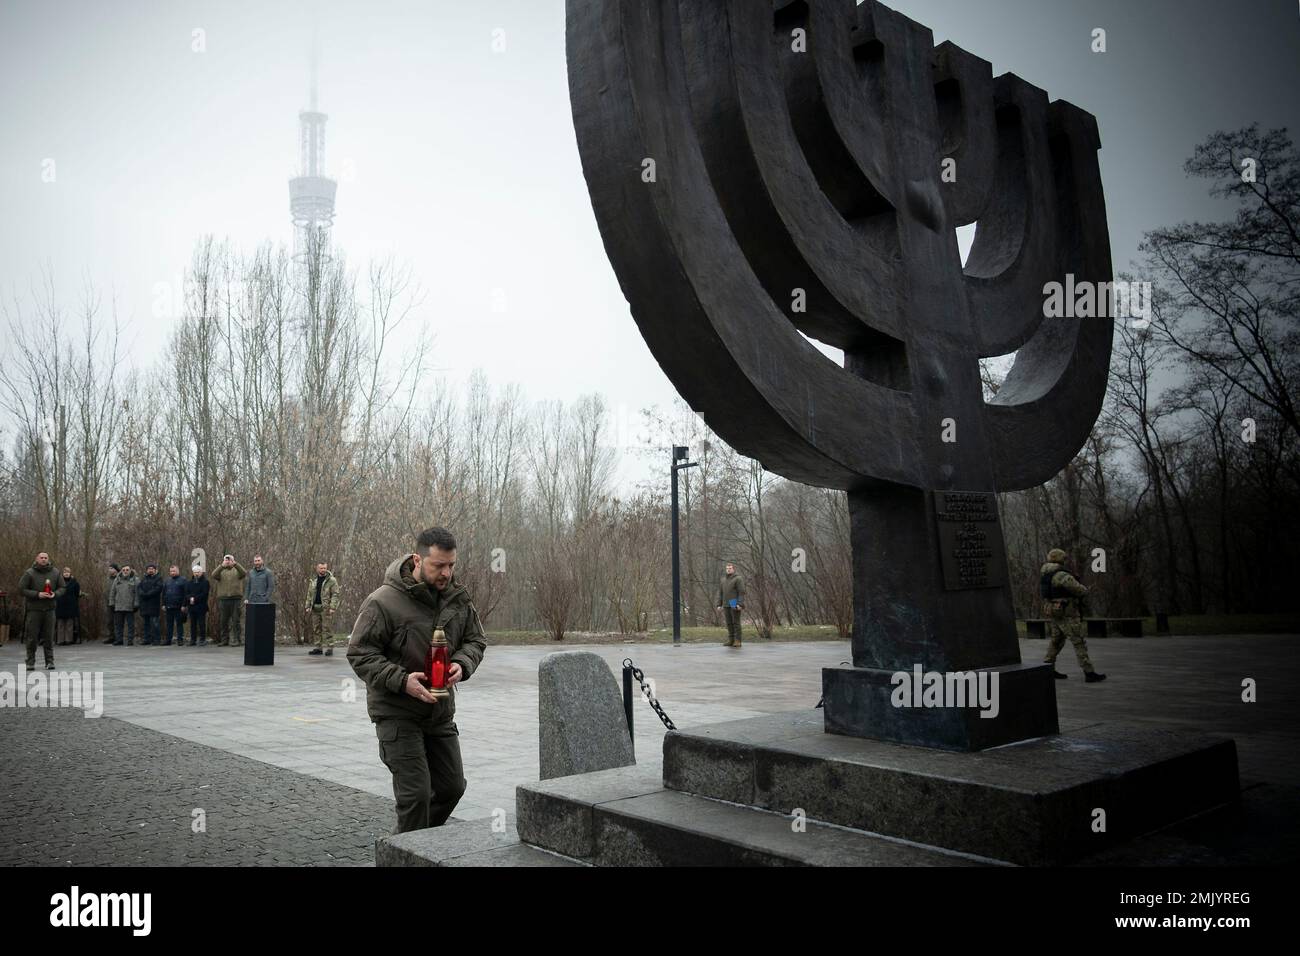 Kyiv, Ukraine. 27 January, 2023. Ukrainian President Volodymyr Zelenskyy places a candle at the Menorah memorial to commemorate International Holocaust Remembrance Day at the Babyn Yar National Historical Memorial site, January 27, 2023 in Kyiv, Ukraine.  Credit: Ukraine Presidency/Ukrainian Presidential Press Office/Alamy Live News Stock Photo